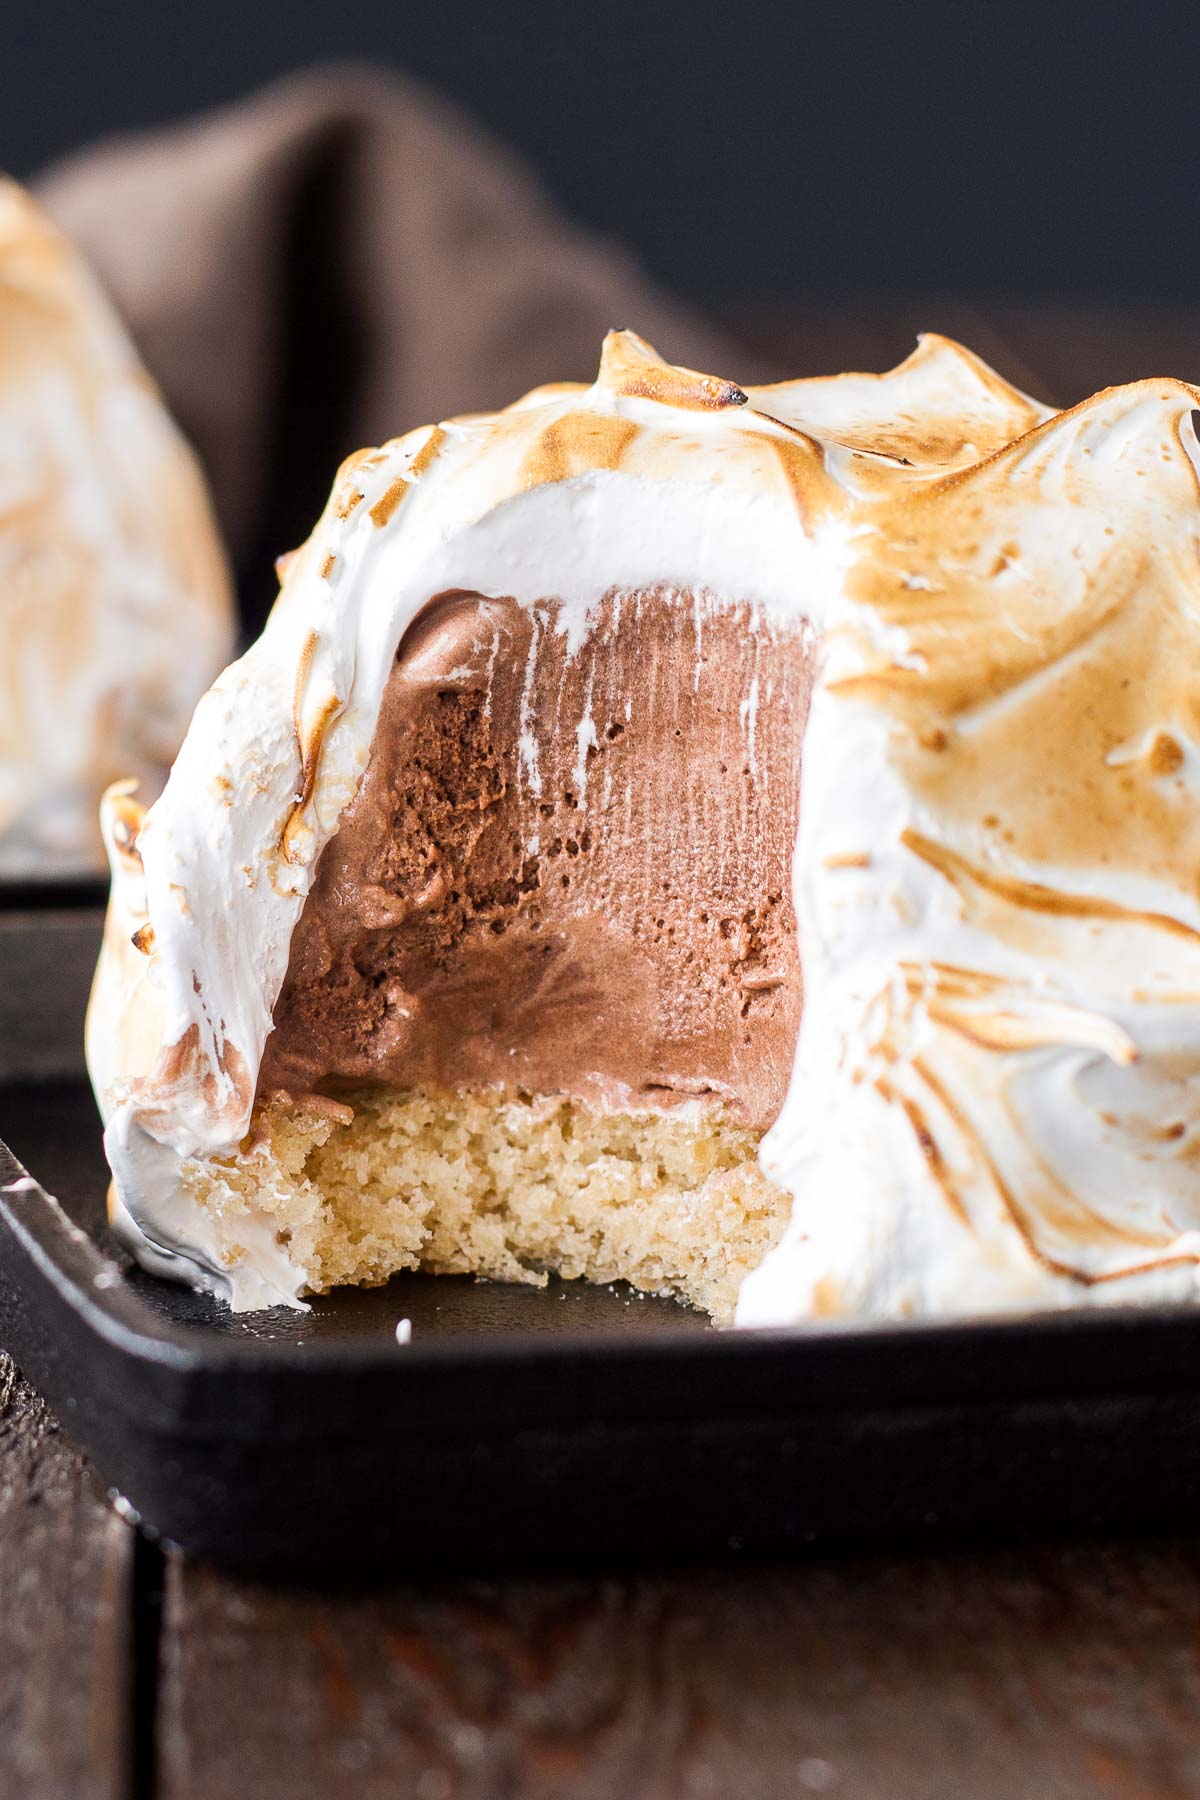 A modern day version of an old classic. This S'mores Baked Alaska combines a fun retro dessert with your favourite campfire treat. | livforcake.com